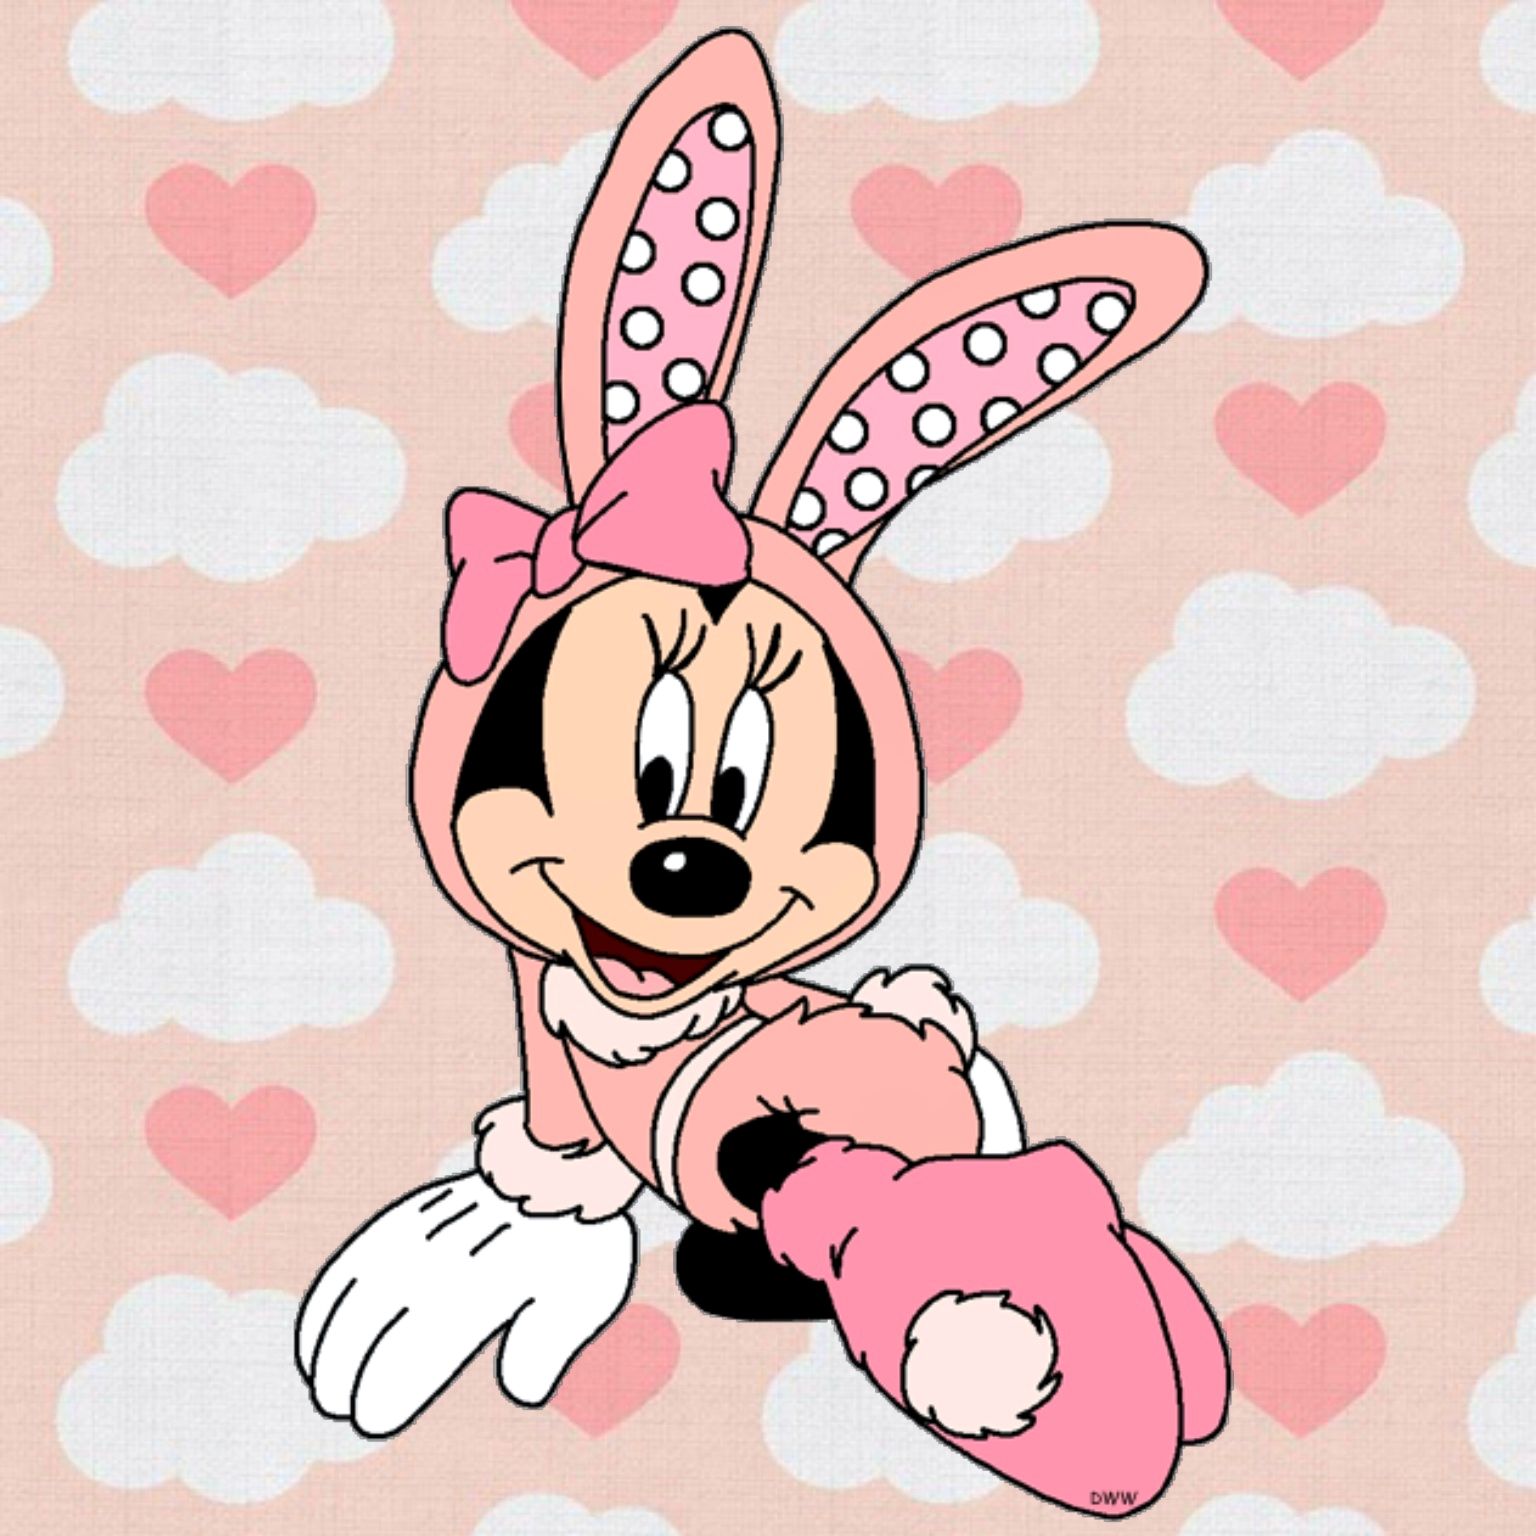 Minnie dressed as an Easter Bunny. Mickey mouse art, Disney